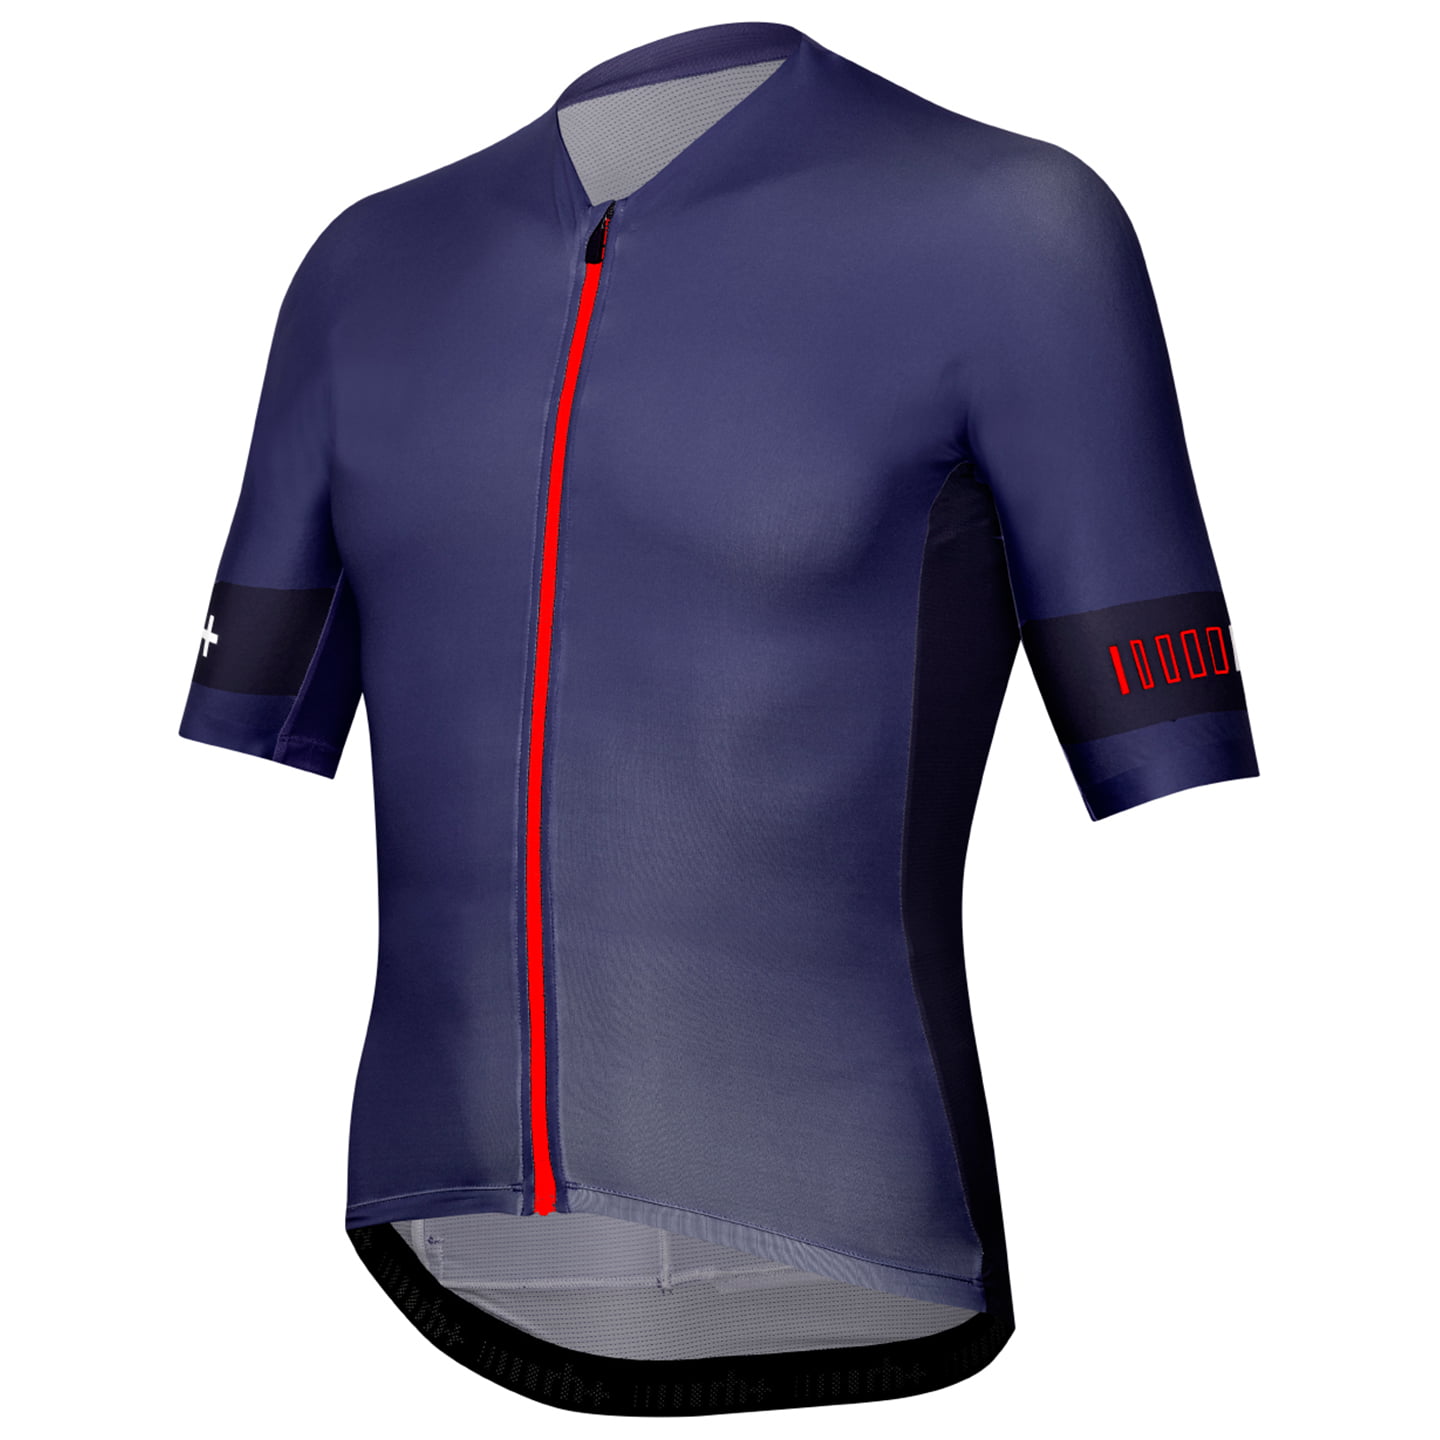 RH+ Speed Short Sleeve Jersey Short Sleeve Jersey, for men, size XL, Cycling jersey, Cycle clothing